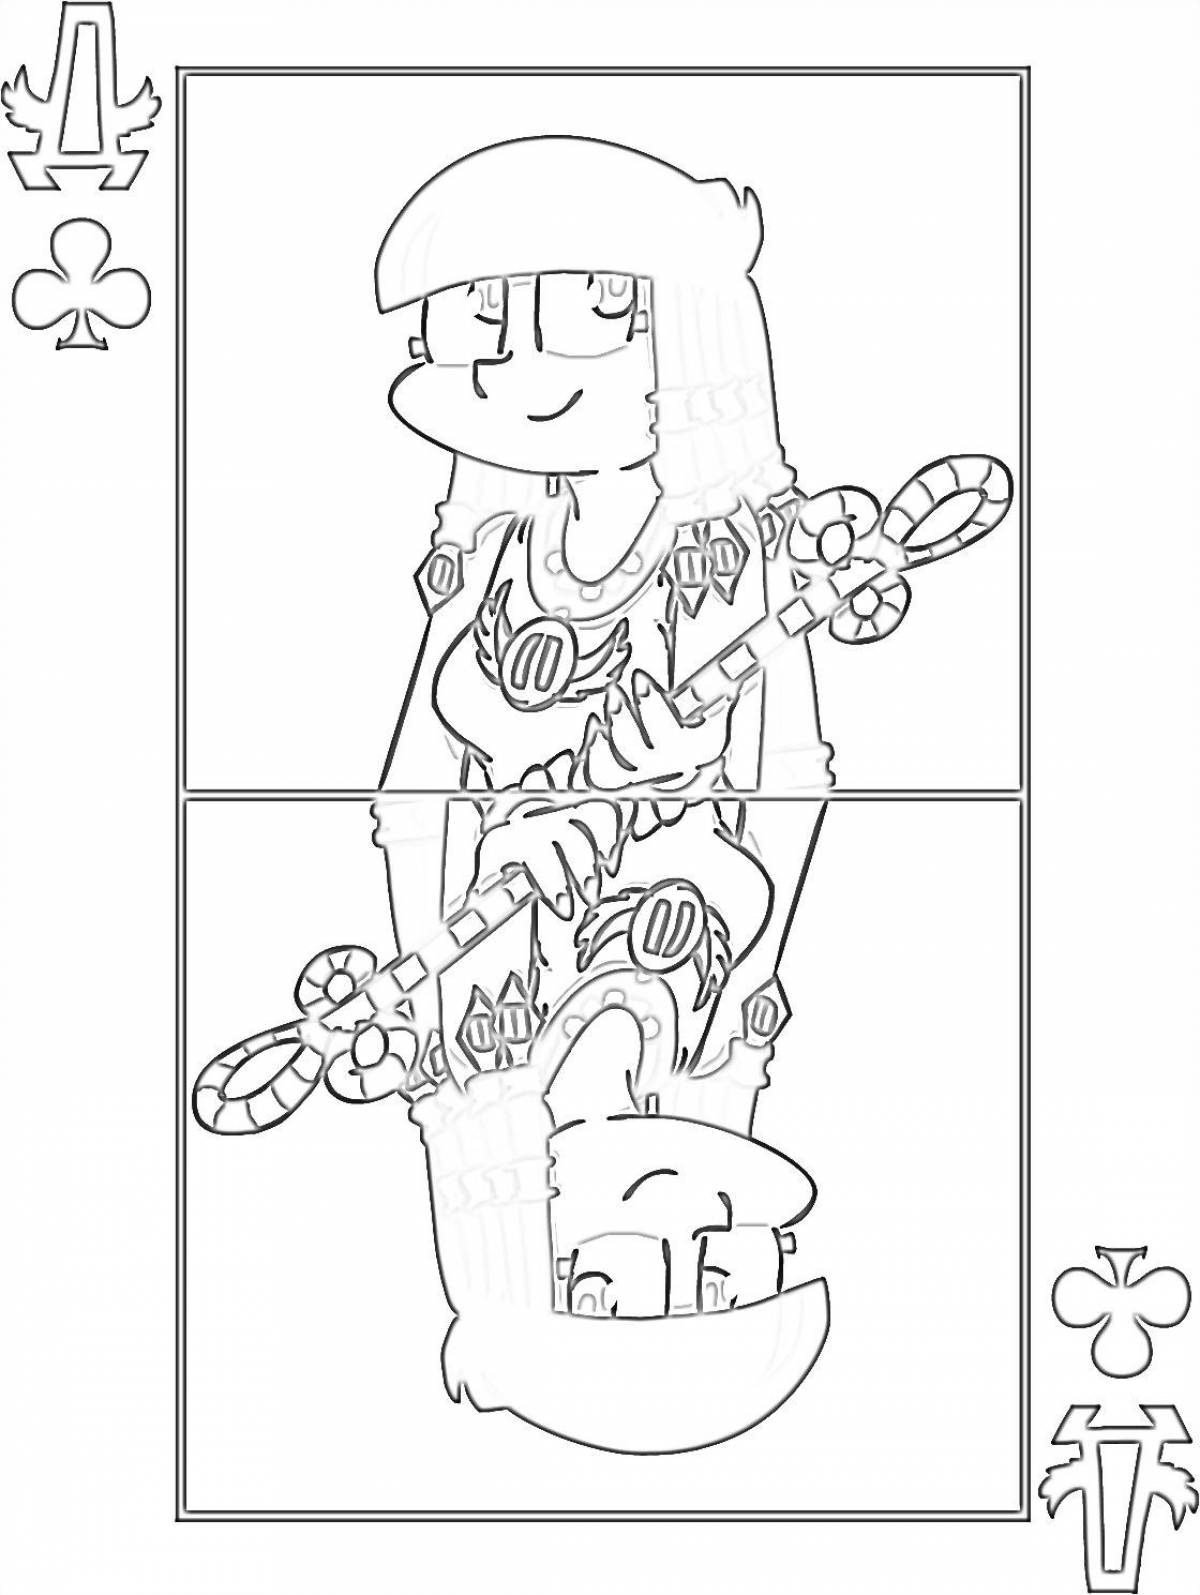 Playful coloring page 13 cards